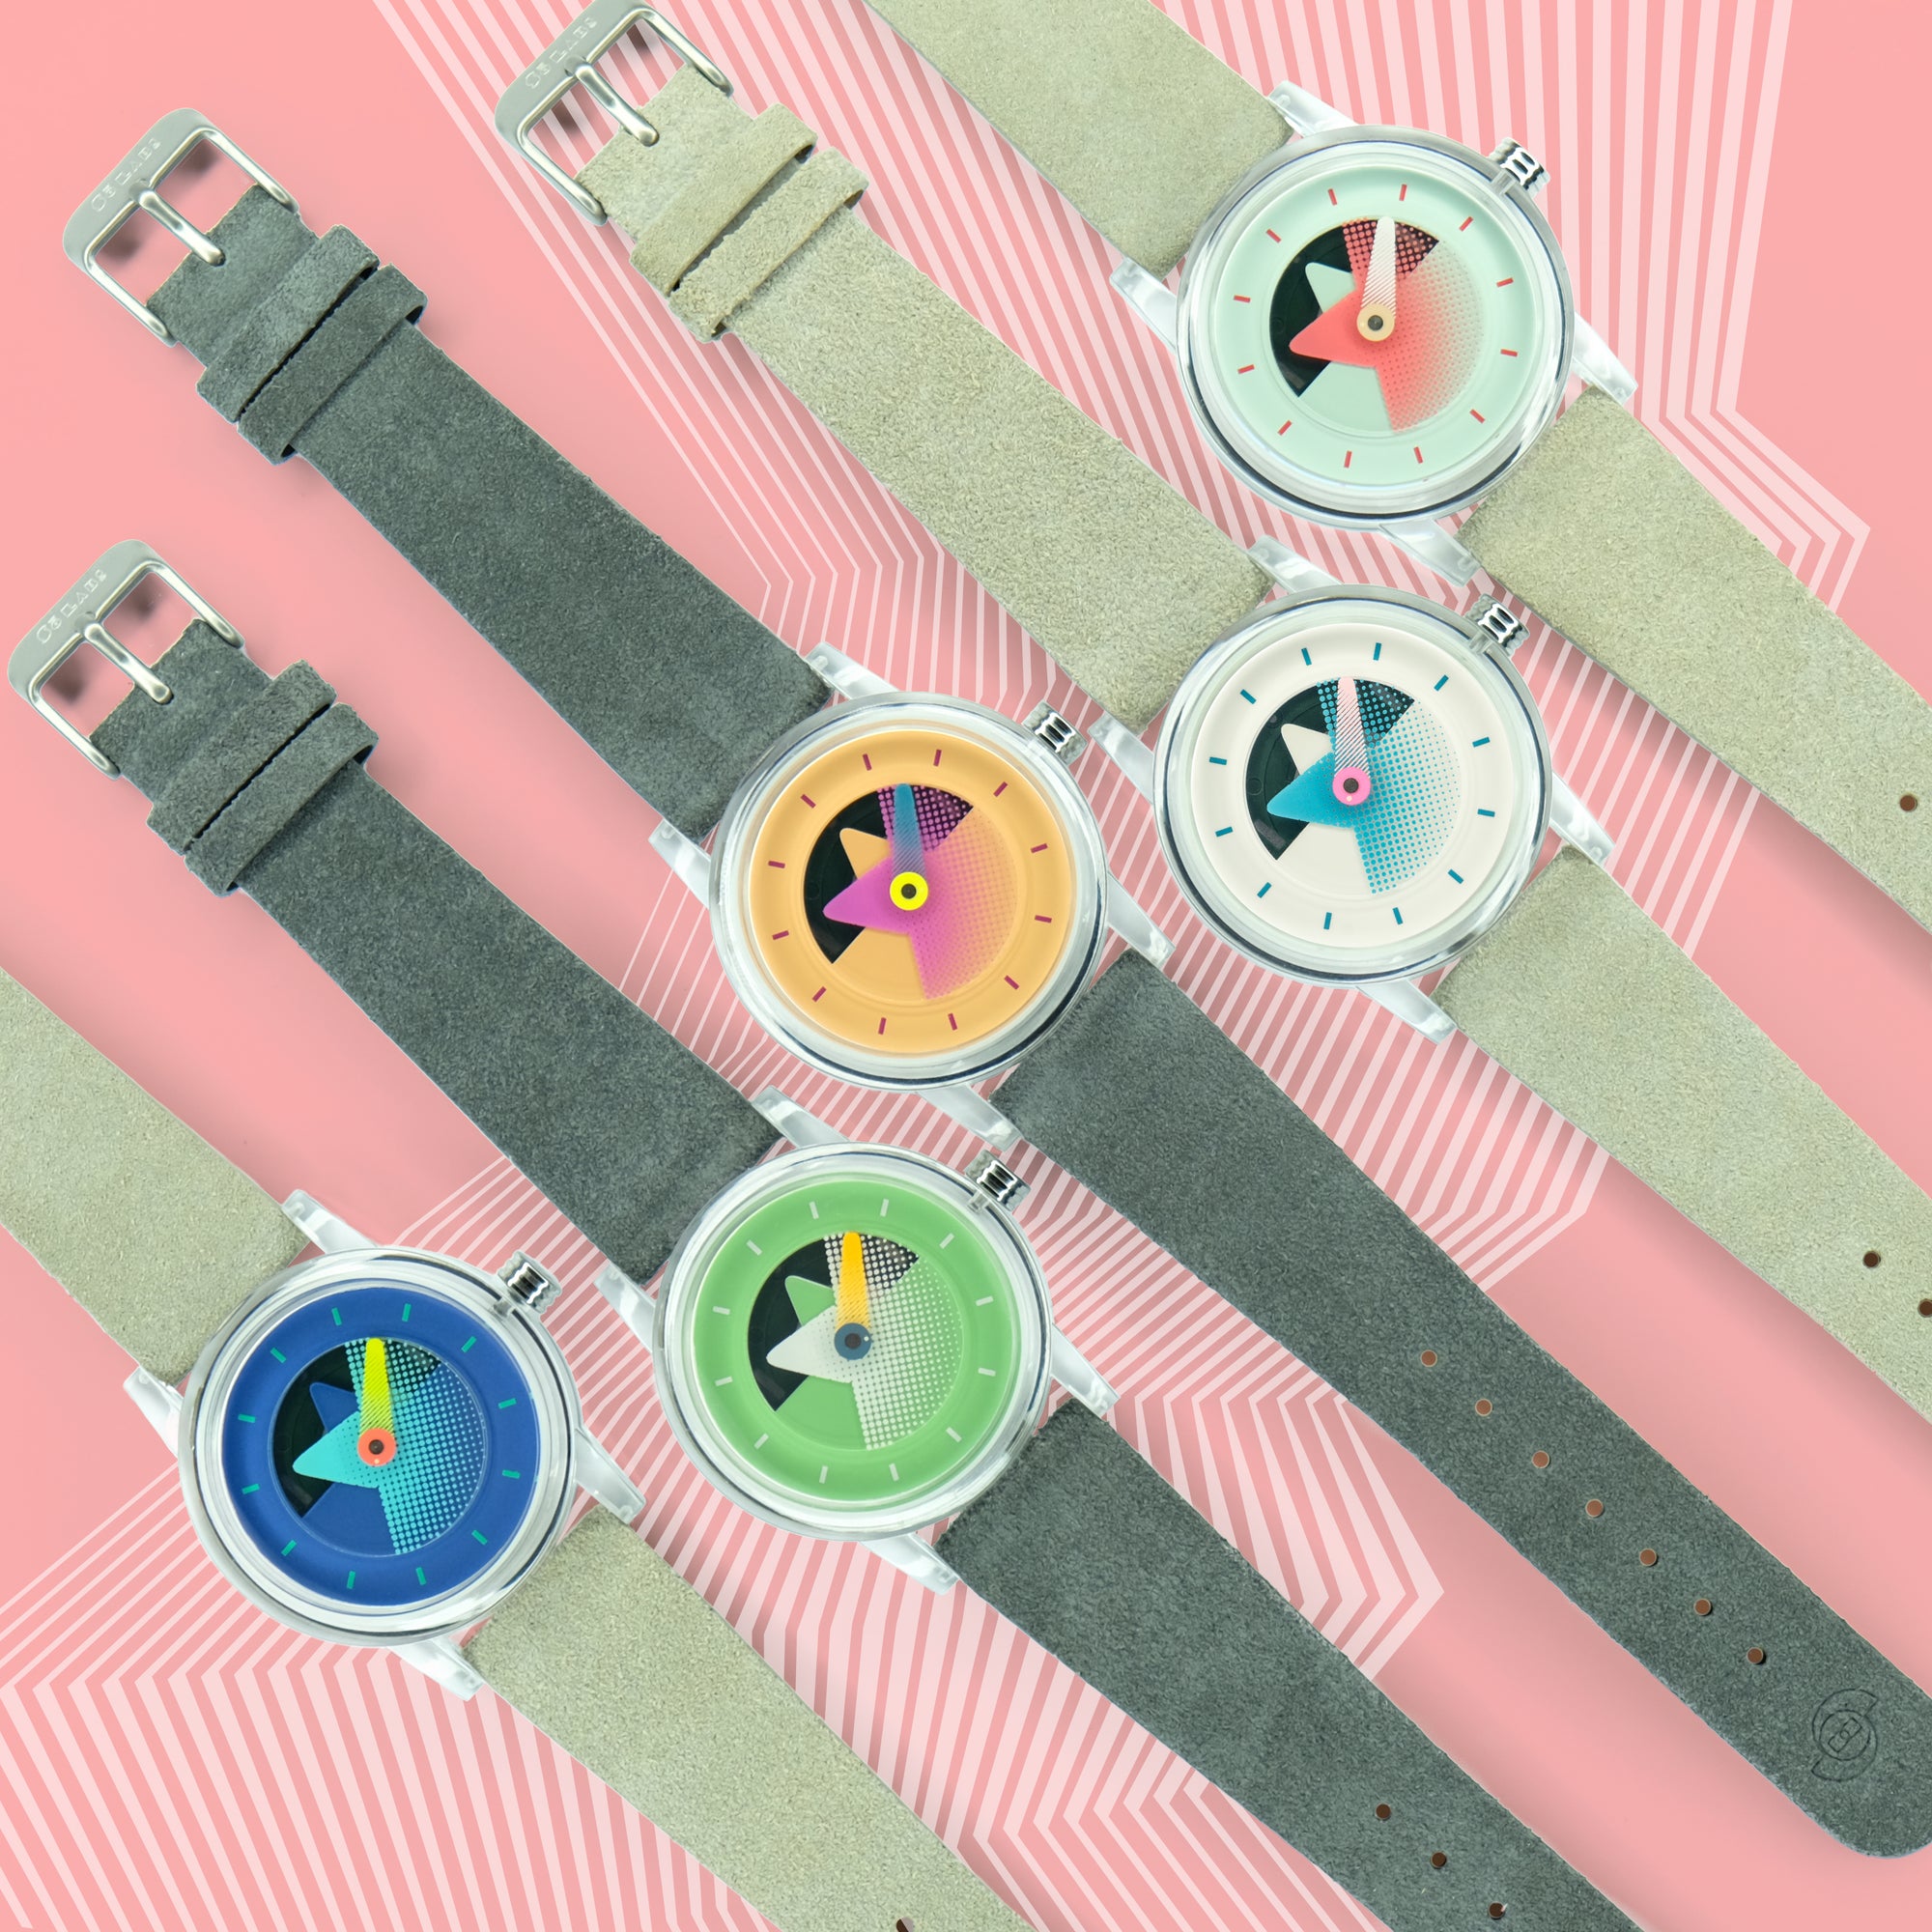 Sō Labs Layer One Quartz Watch Watches Olympic Sky Emerald Rhino Salmon Fandango Abalone Steel Turkish Coral @solabs Solabs So Labs so-labs.co Limited Edition Funky Fun Holiday Gift Watches Timepiece clear